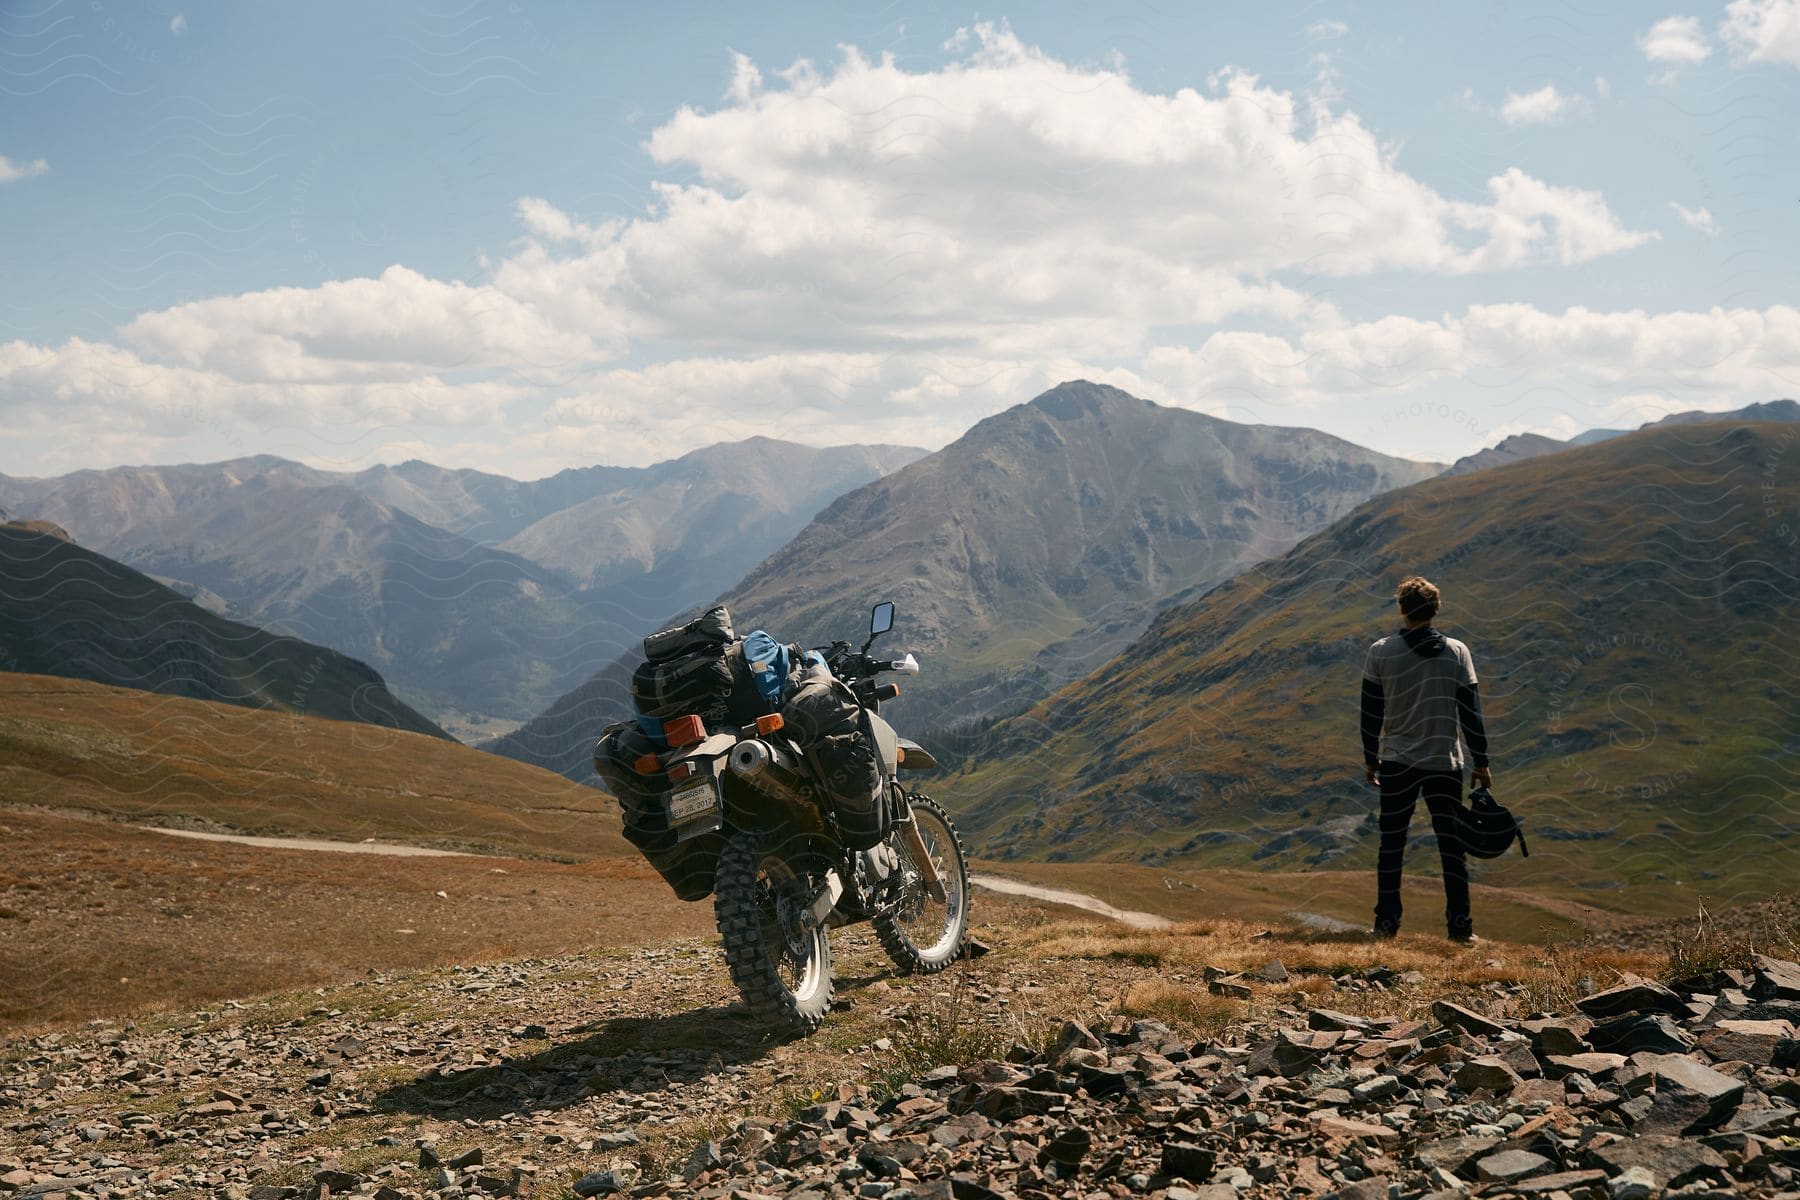 A person riding a motorcycle in the mountains